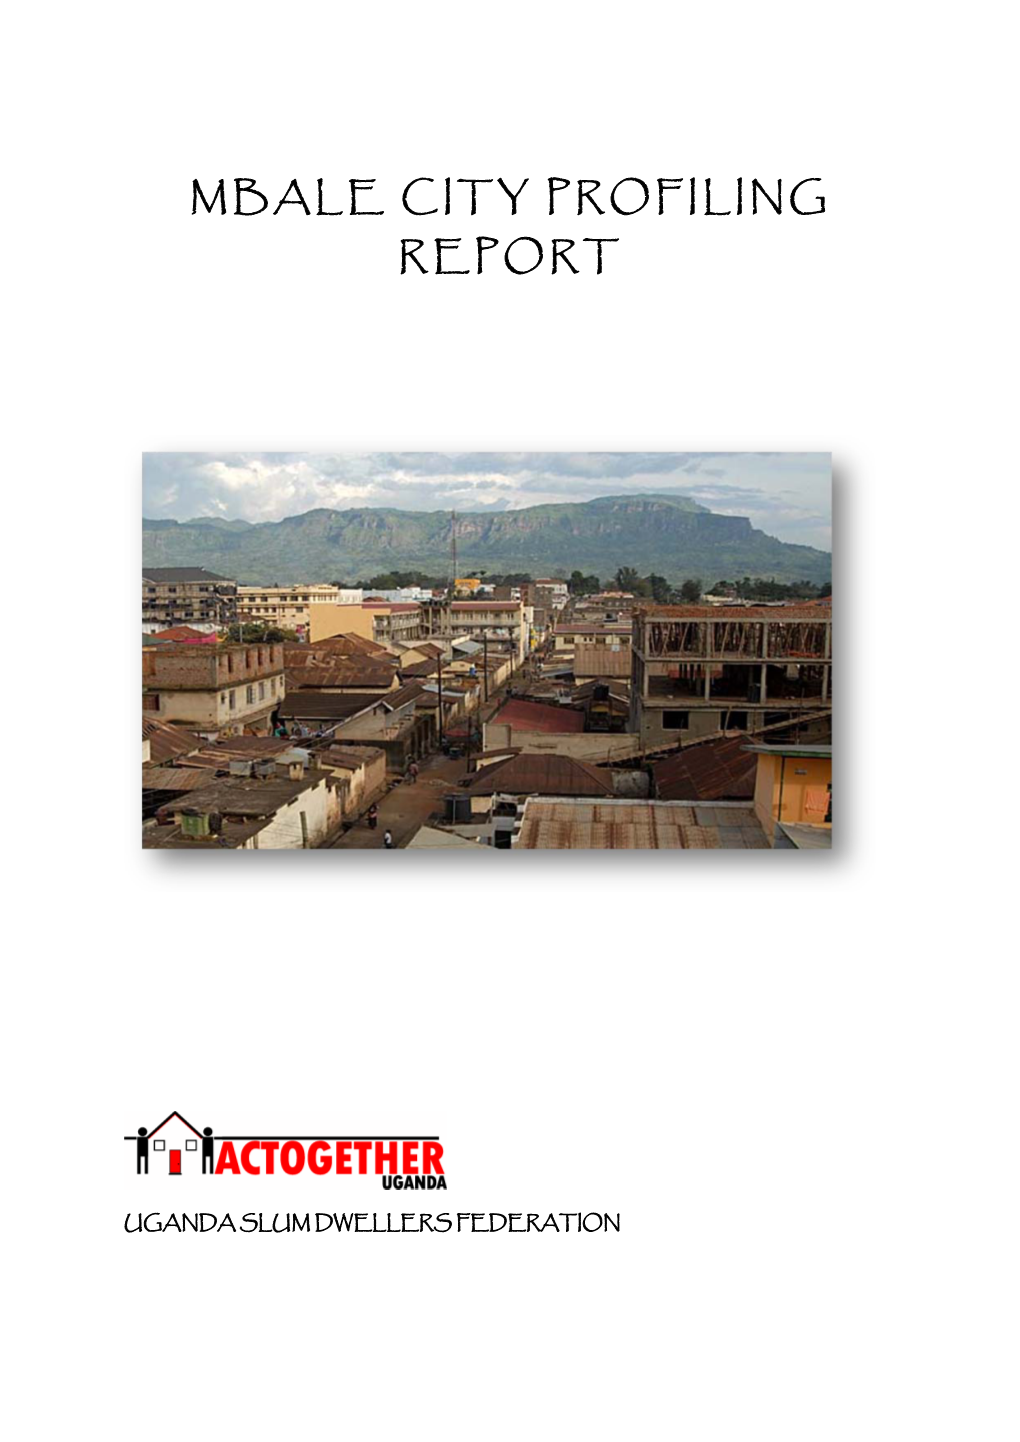 Mbale City Profiling Report